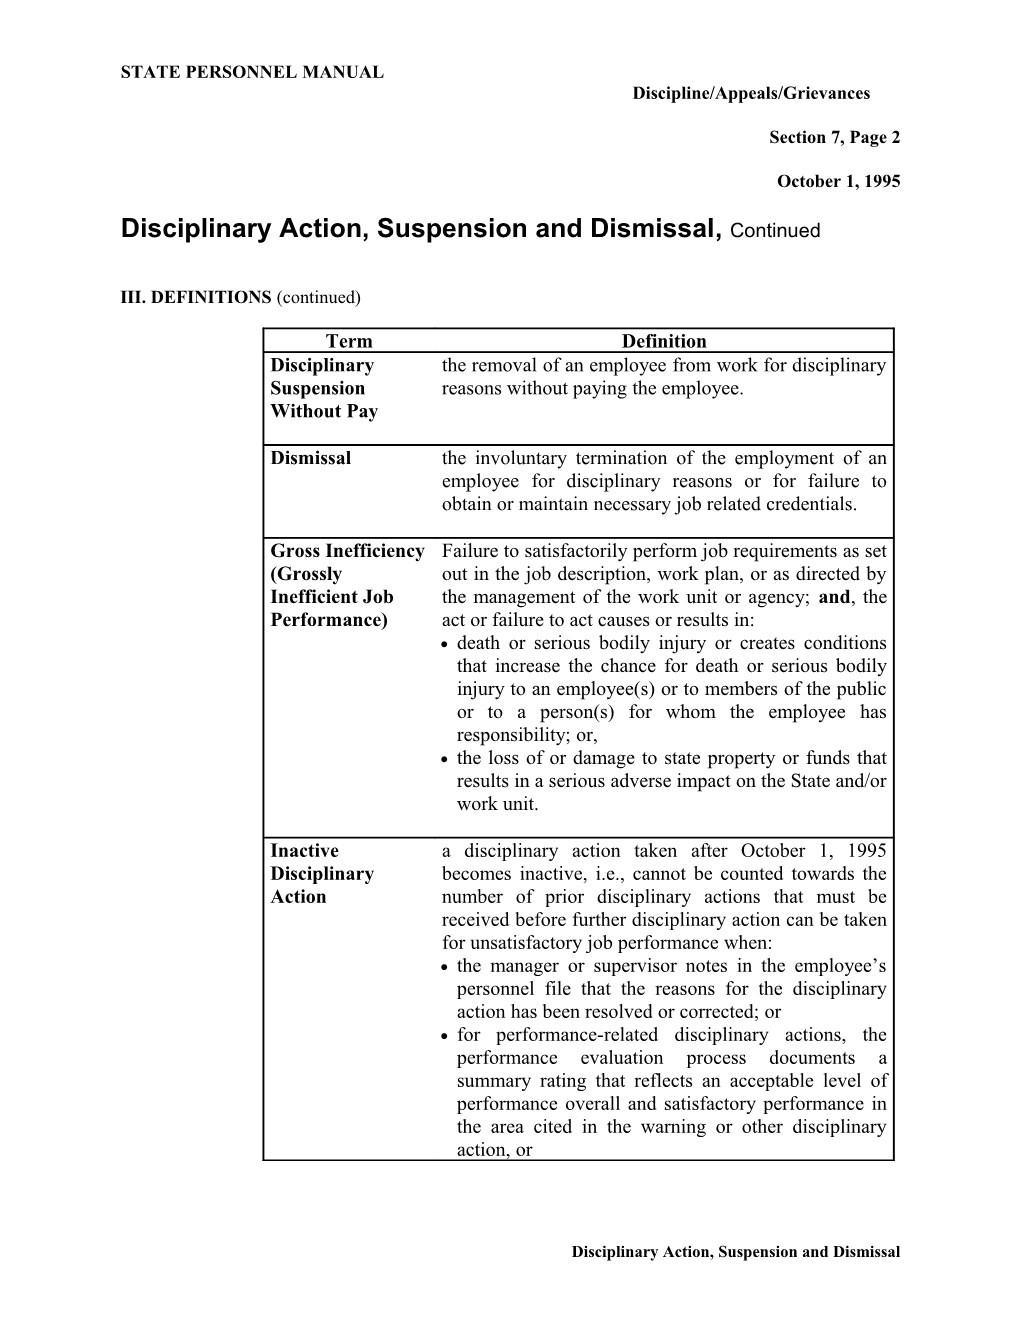 Disciplinary Action, Suspension and Dismissal